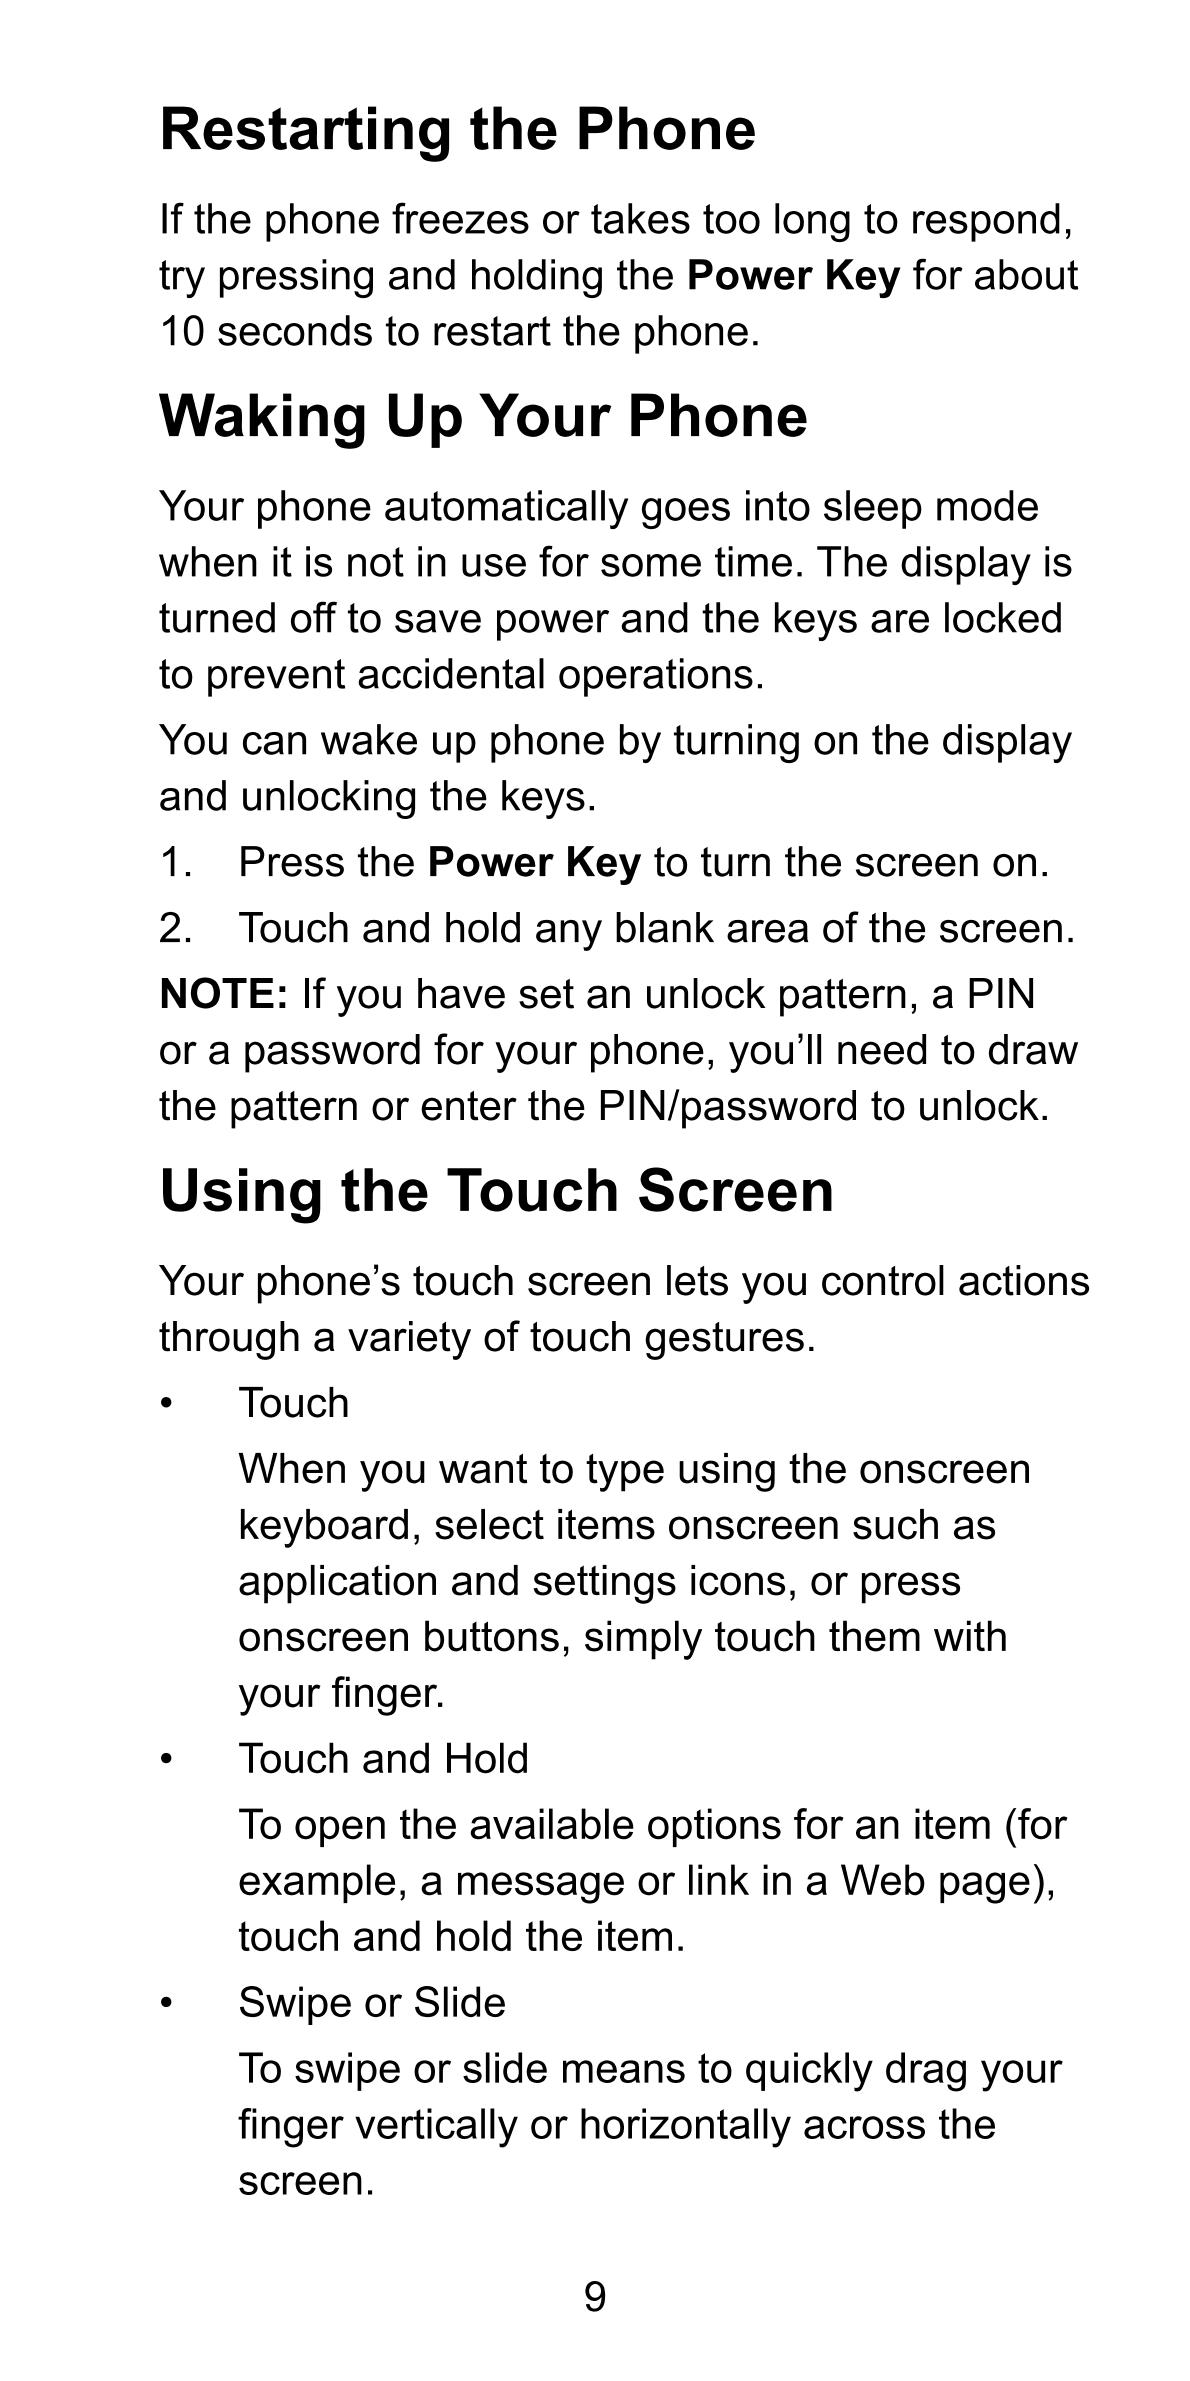 Restarting the Phone
If the phone freezes or takes too long to respond, 
try pressing and holding the  Power Key for about 
10 s